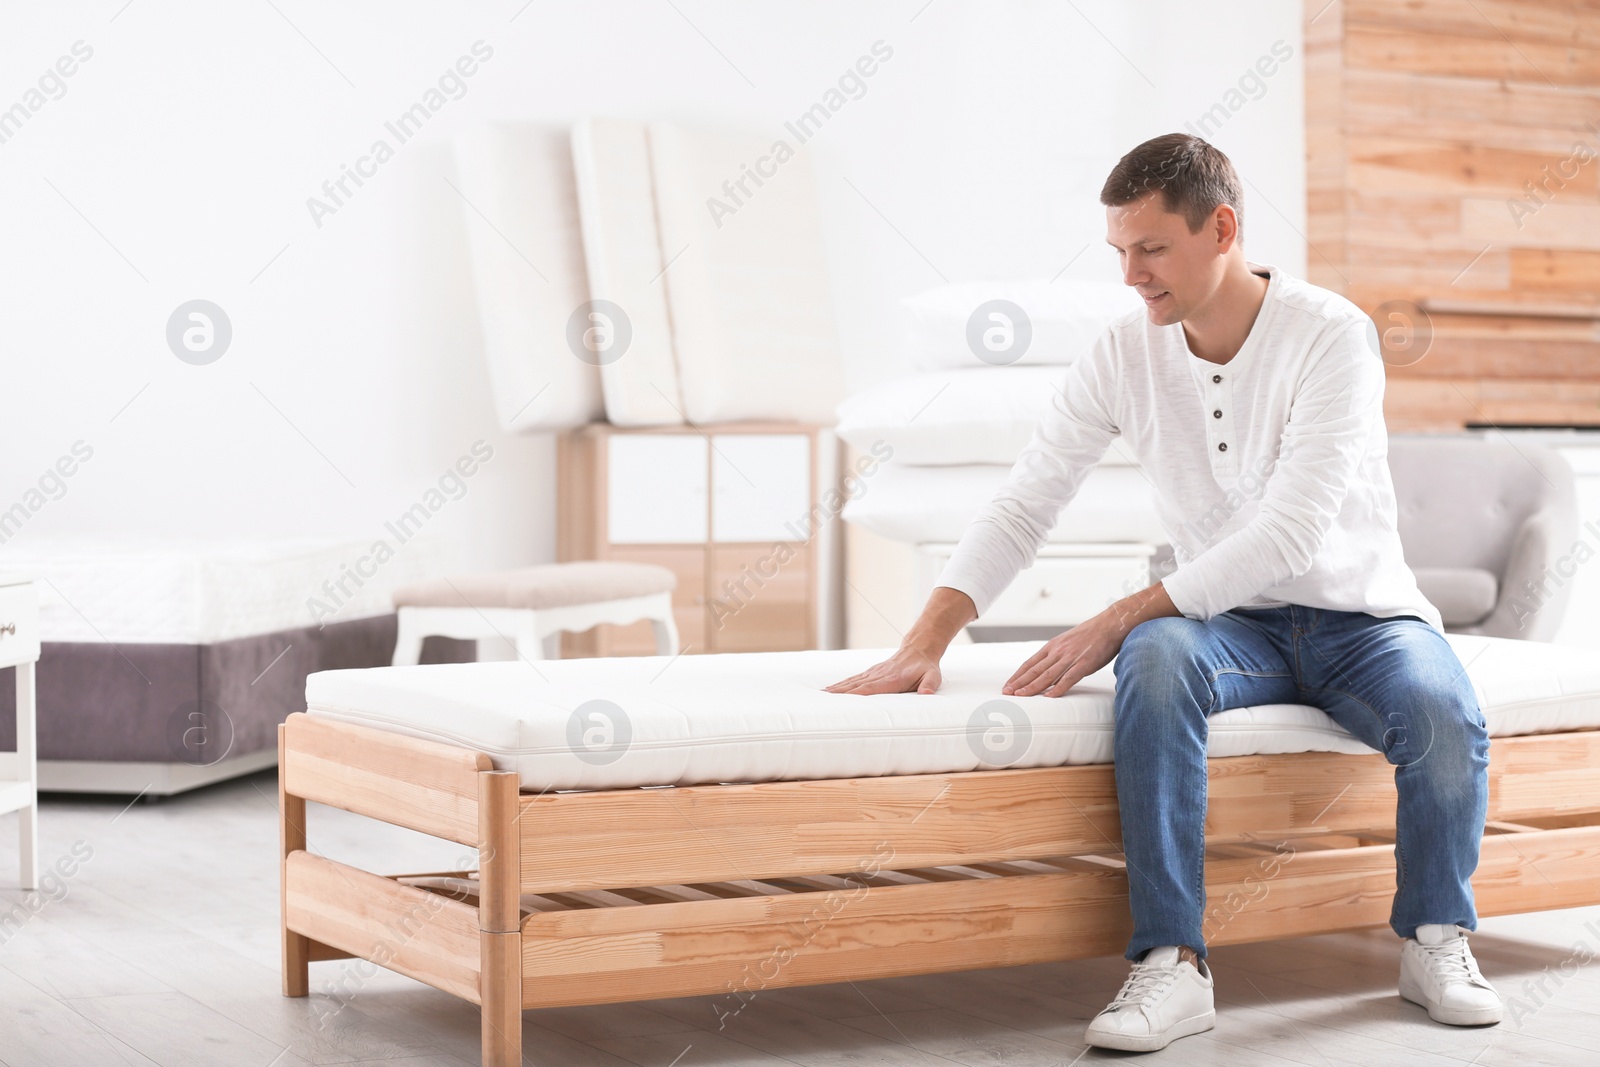 Photo of Man touching mattress in furniture store. Space for text